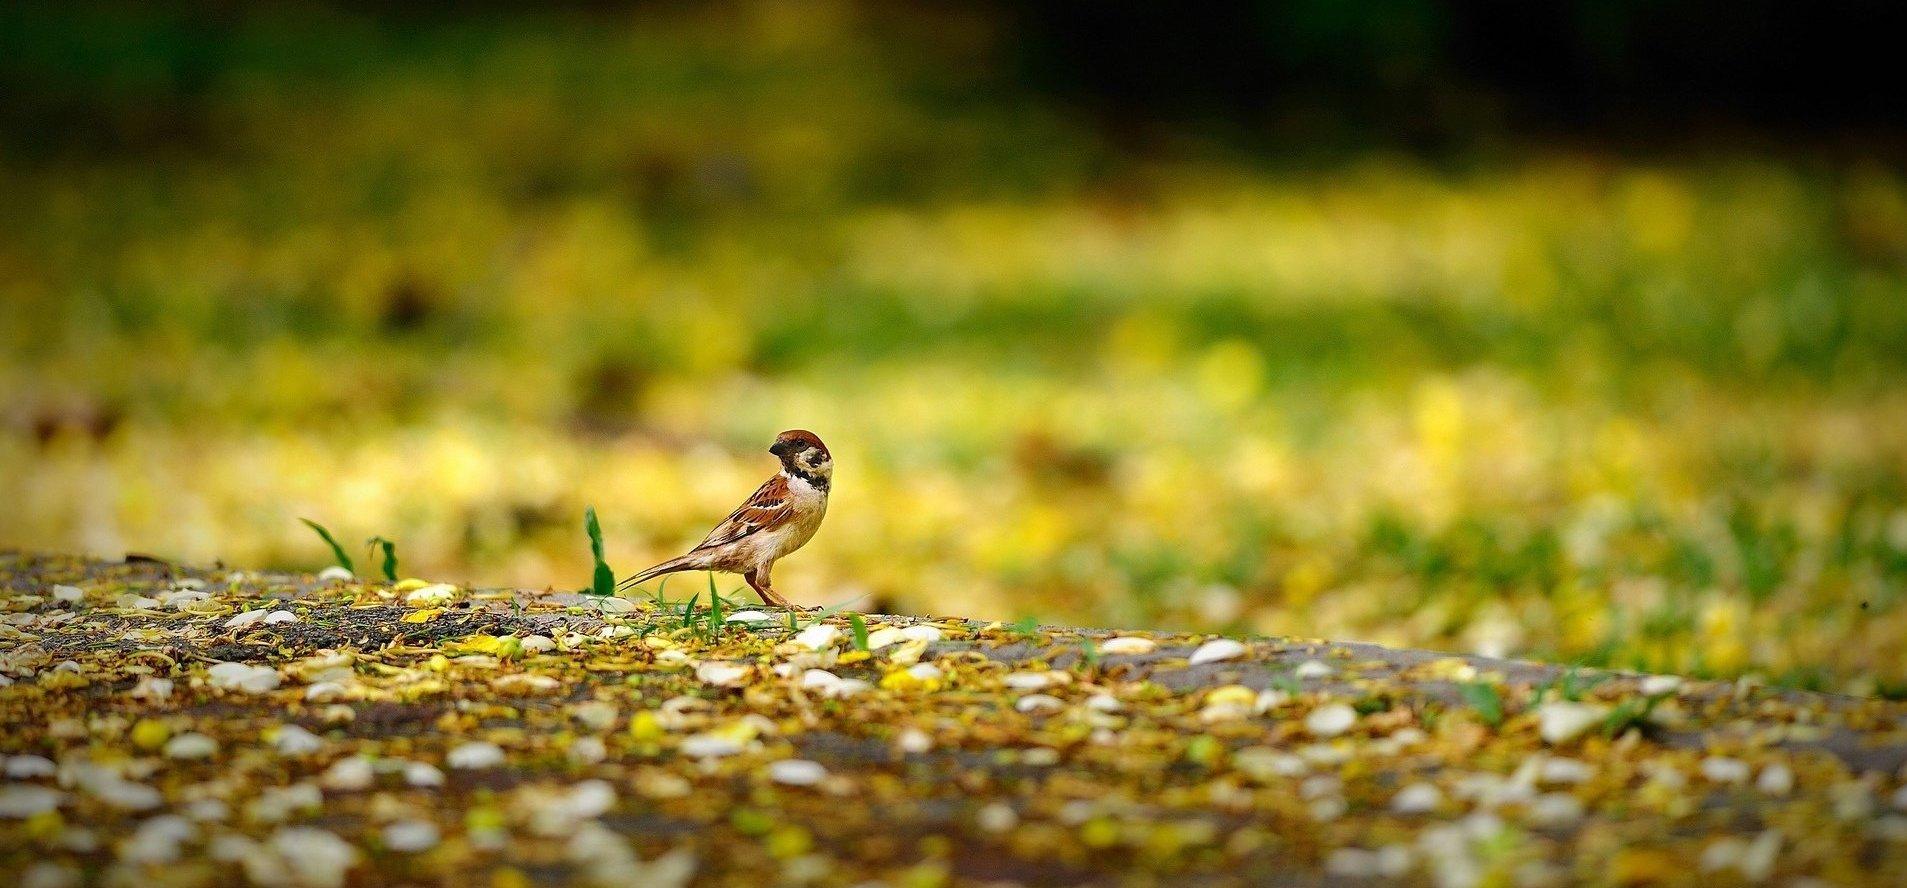 Animals Poultry Sparrow Sparrow Nature Yellow Blur